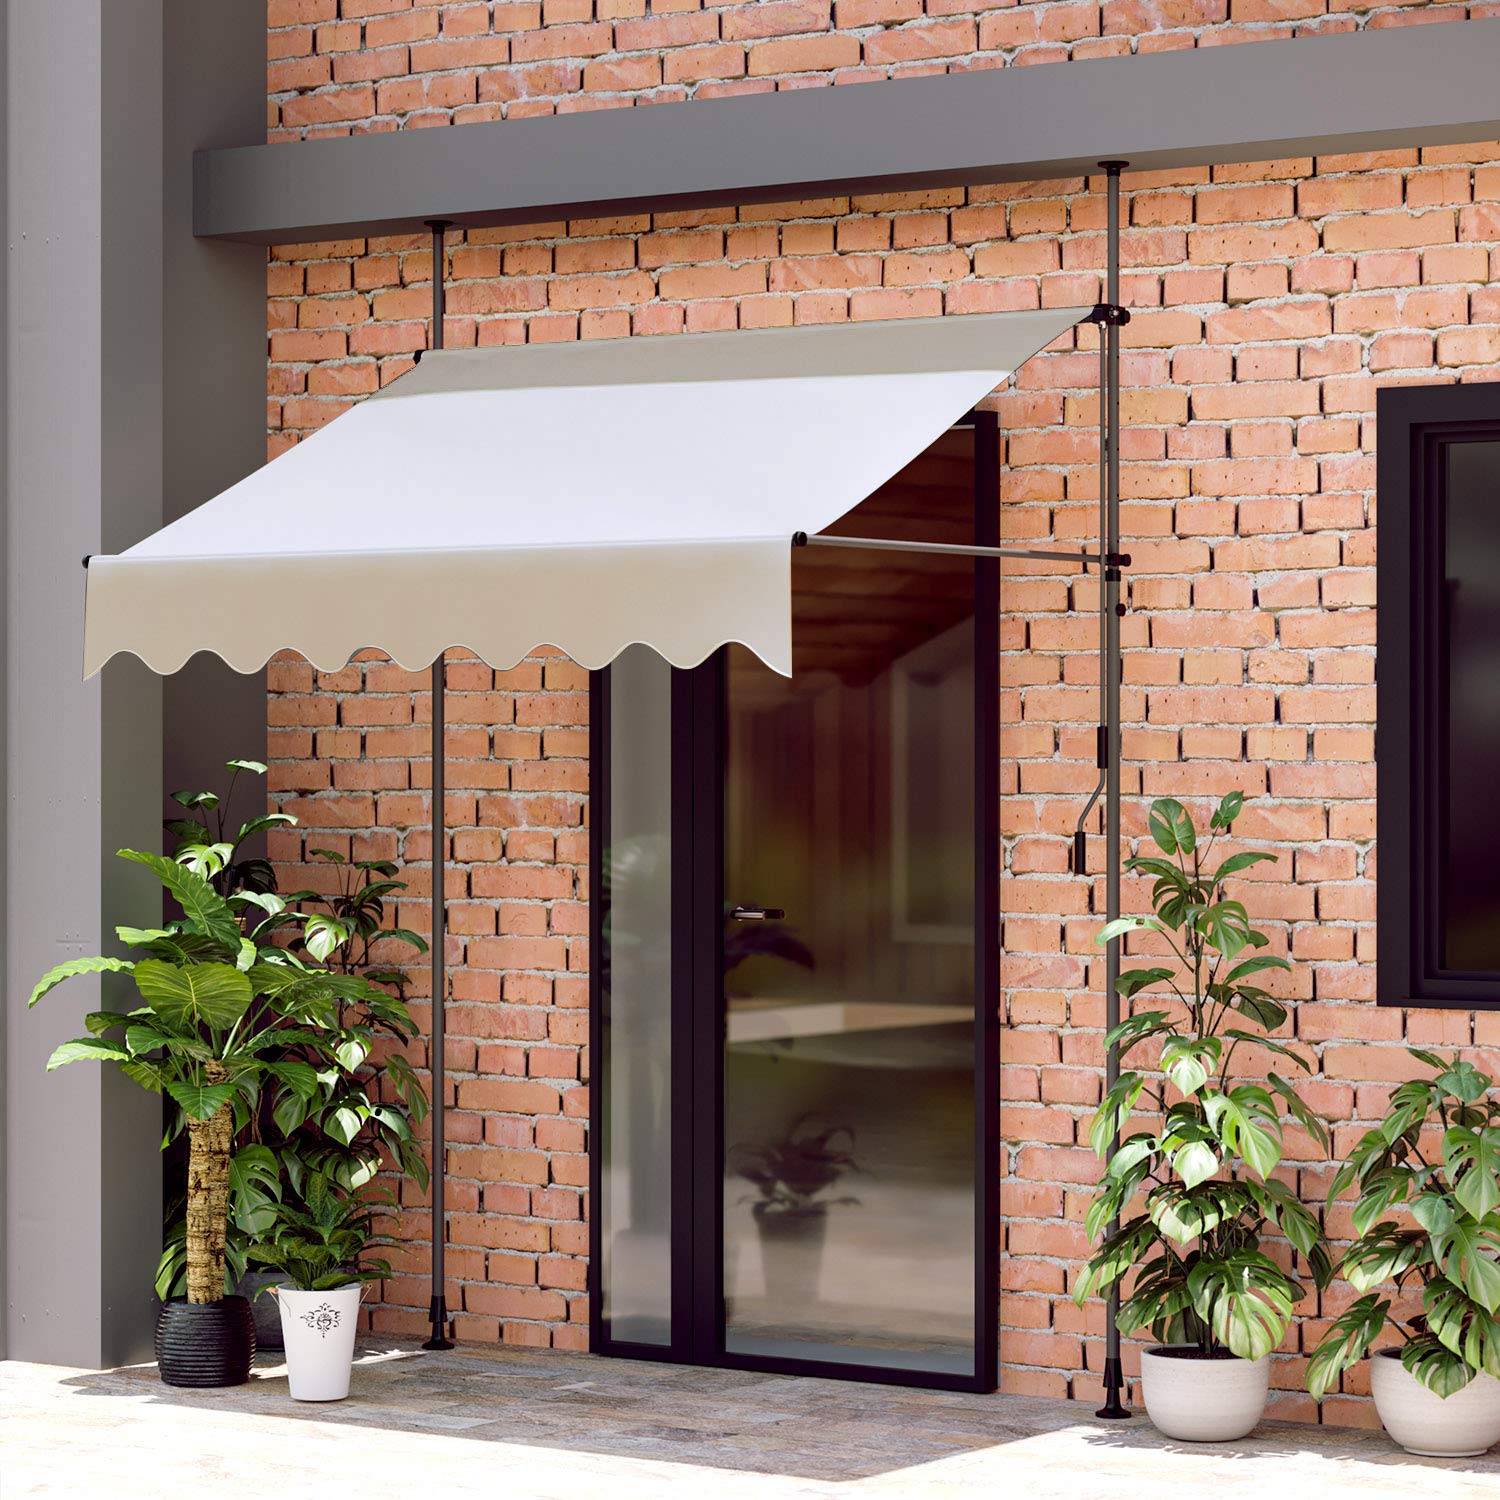 No Drill Adjustable Patio Retractable Awning UV Resistant Waterproof Canopy with Hand Crank for any Window or Door KGORGE Store